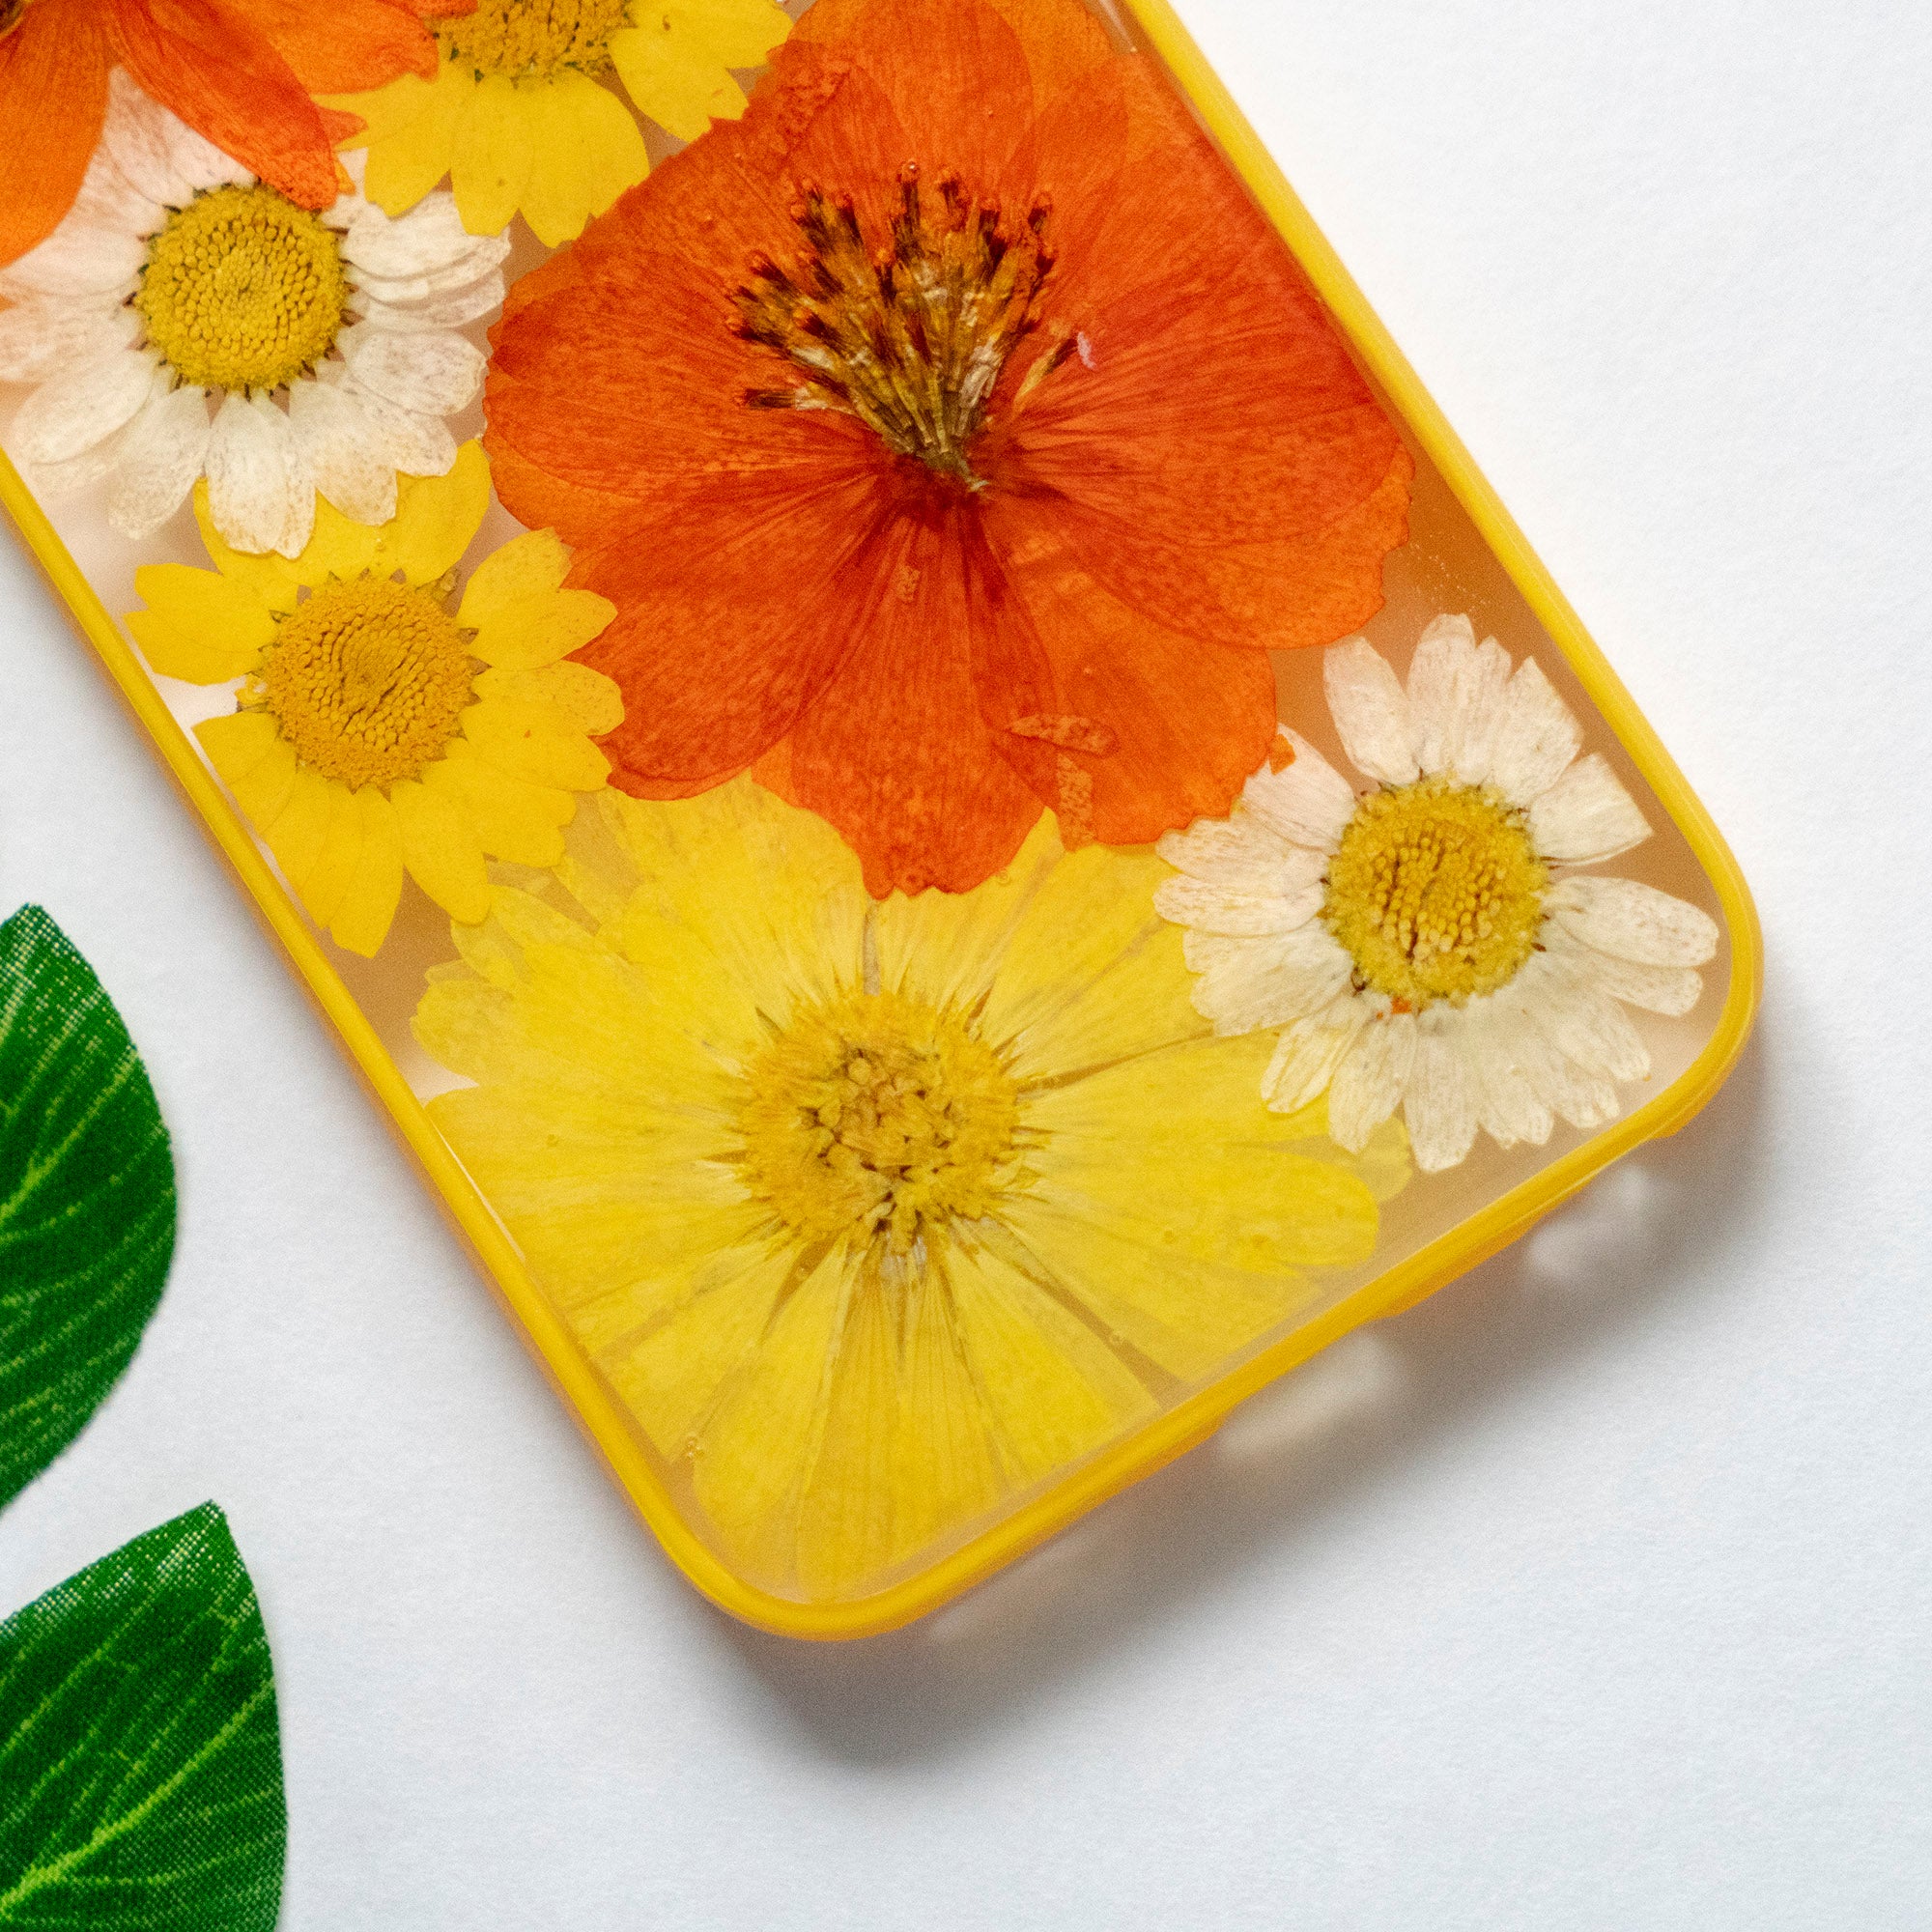 Pressed Orange Yellow Daisy Sunflower Flower Floral iPhone 6 6S Protective Bumper Case Floral Neverland Floralfy 03